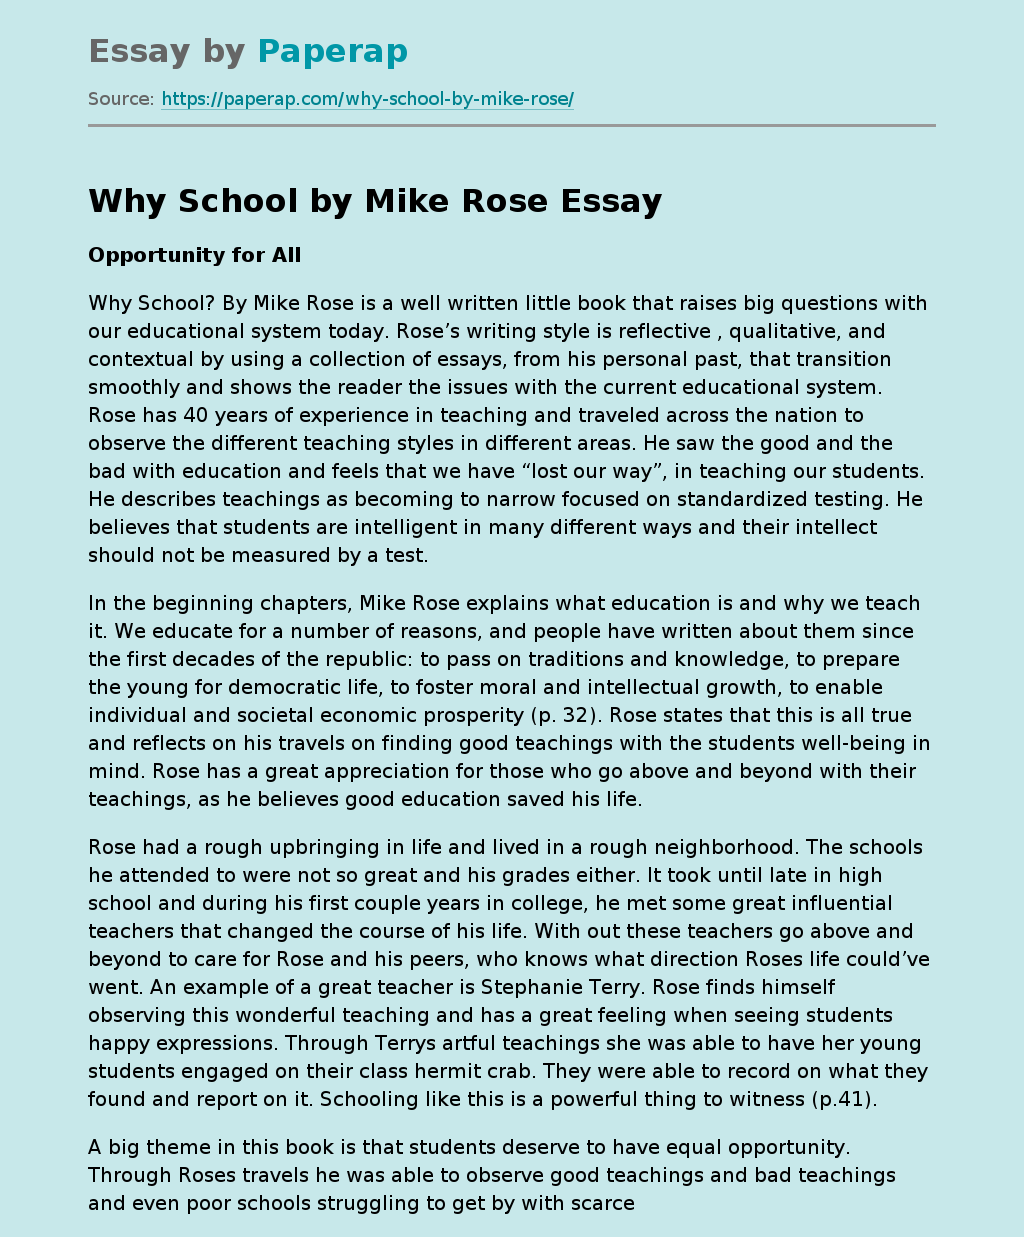 Why School by Mike Rose